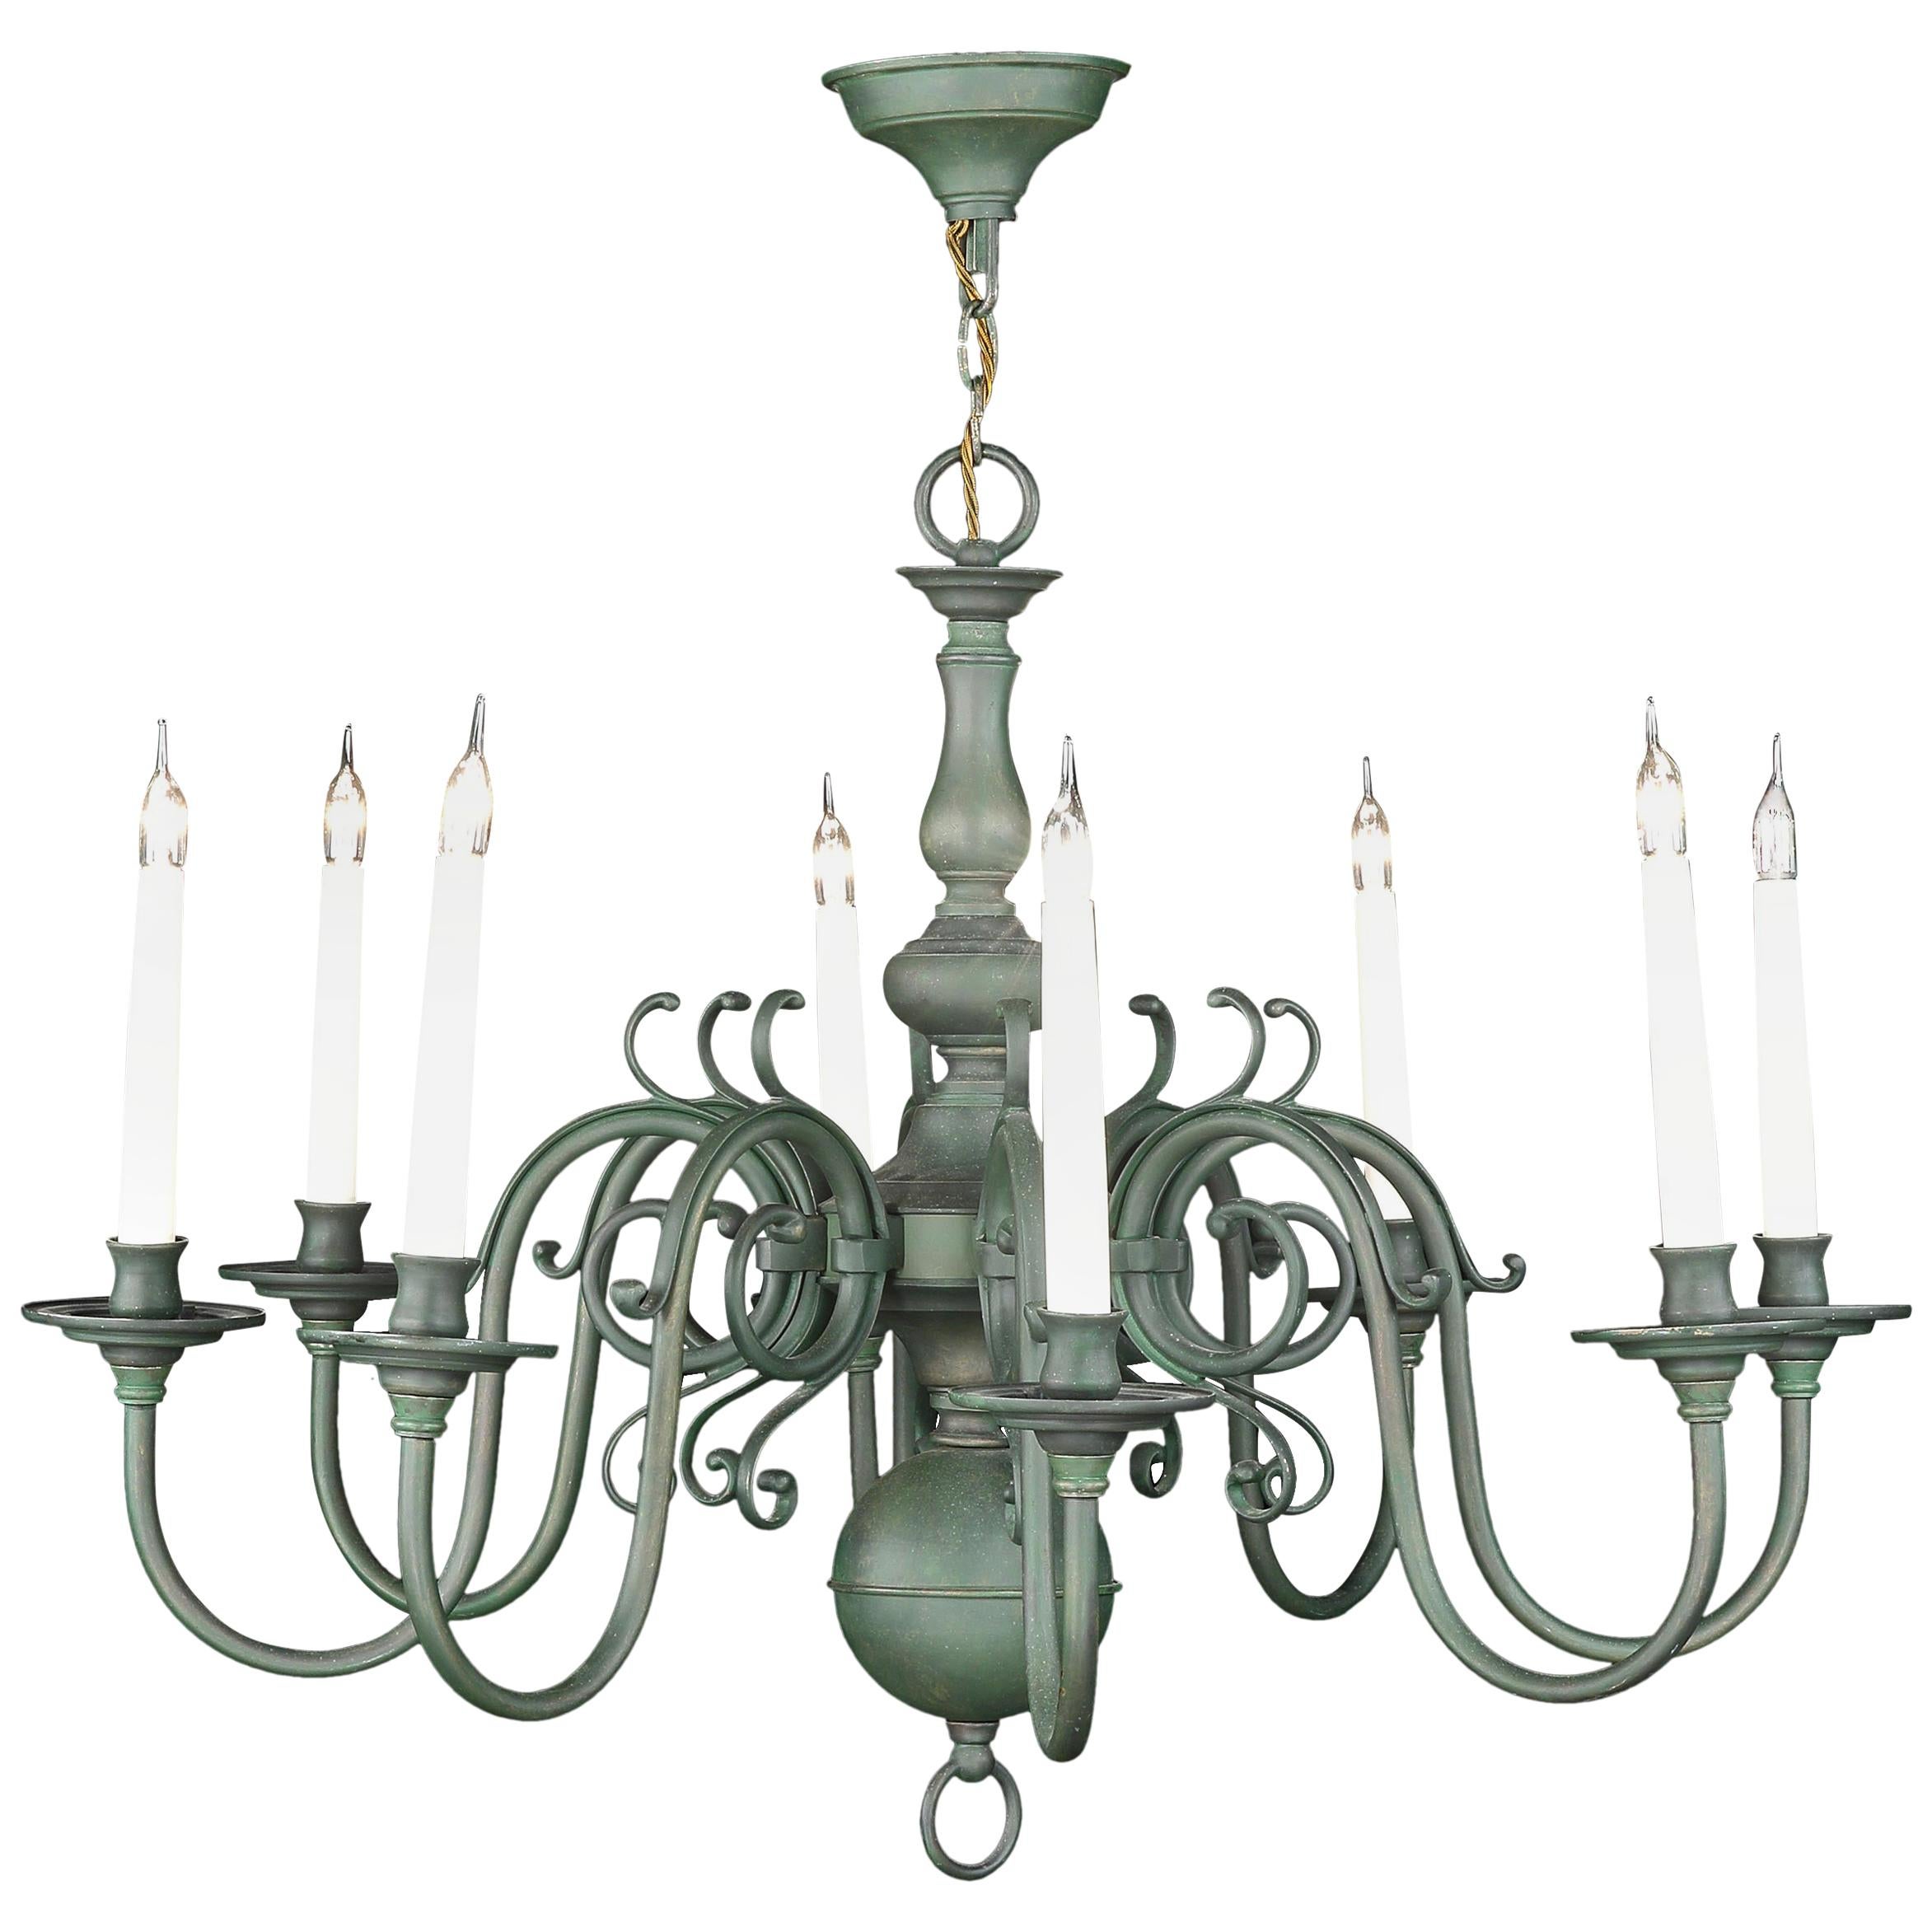 Chandelier Brass Painted Green 8-Arm Electrified Candle Lamp Baroque Dutch For Sale